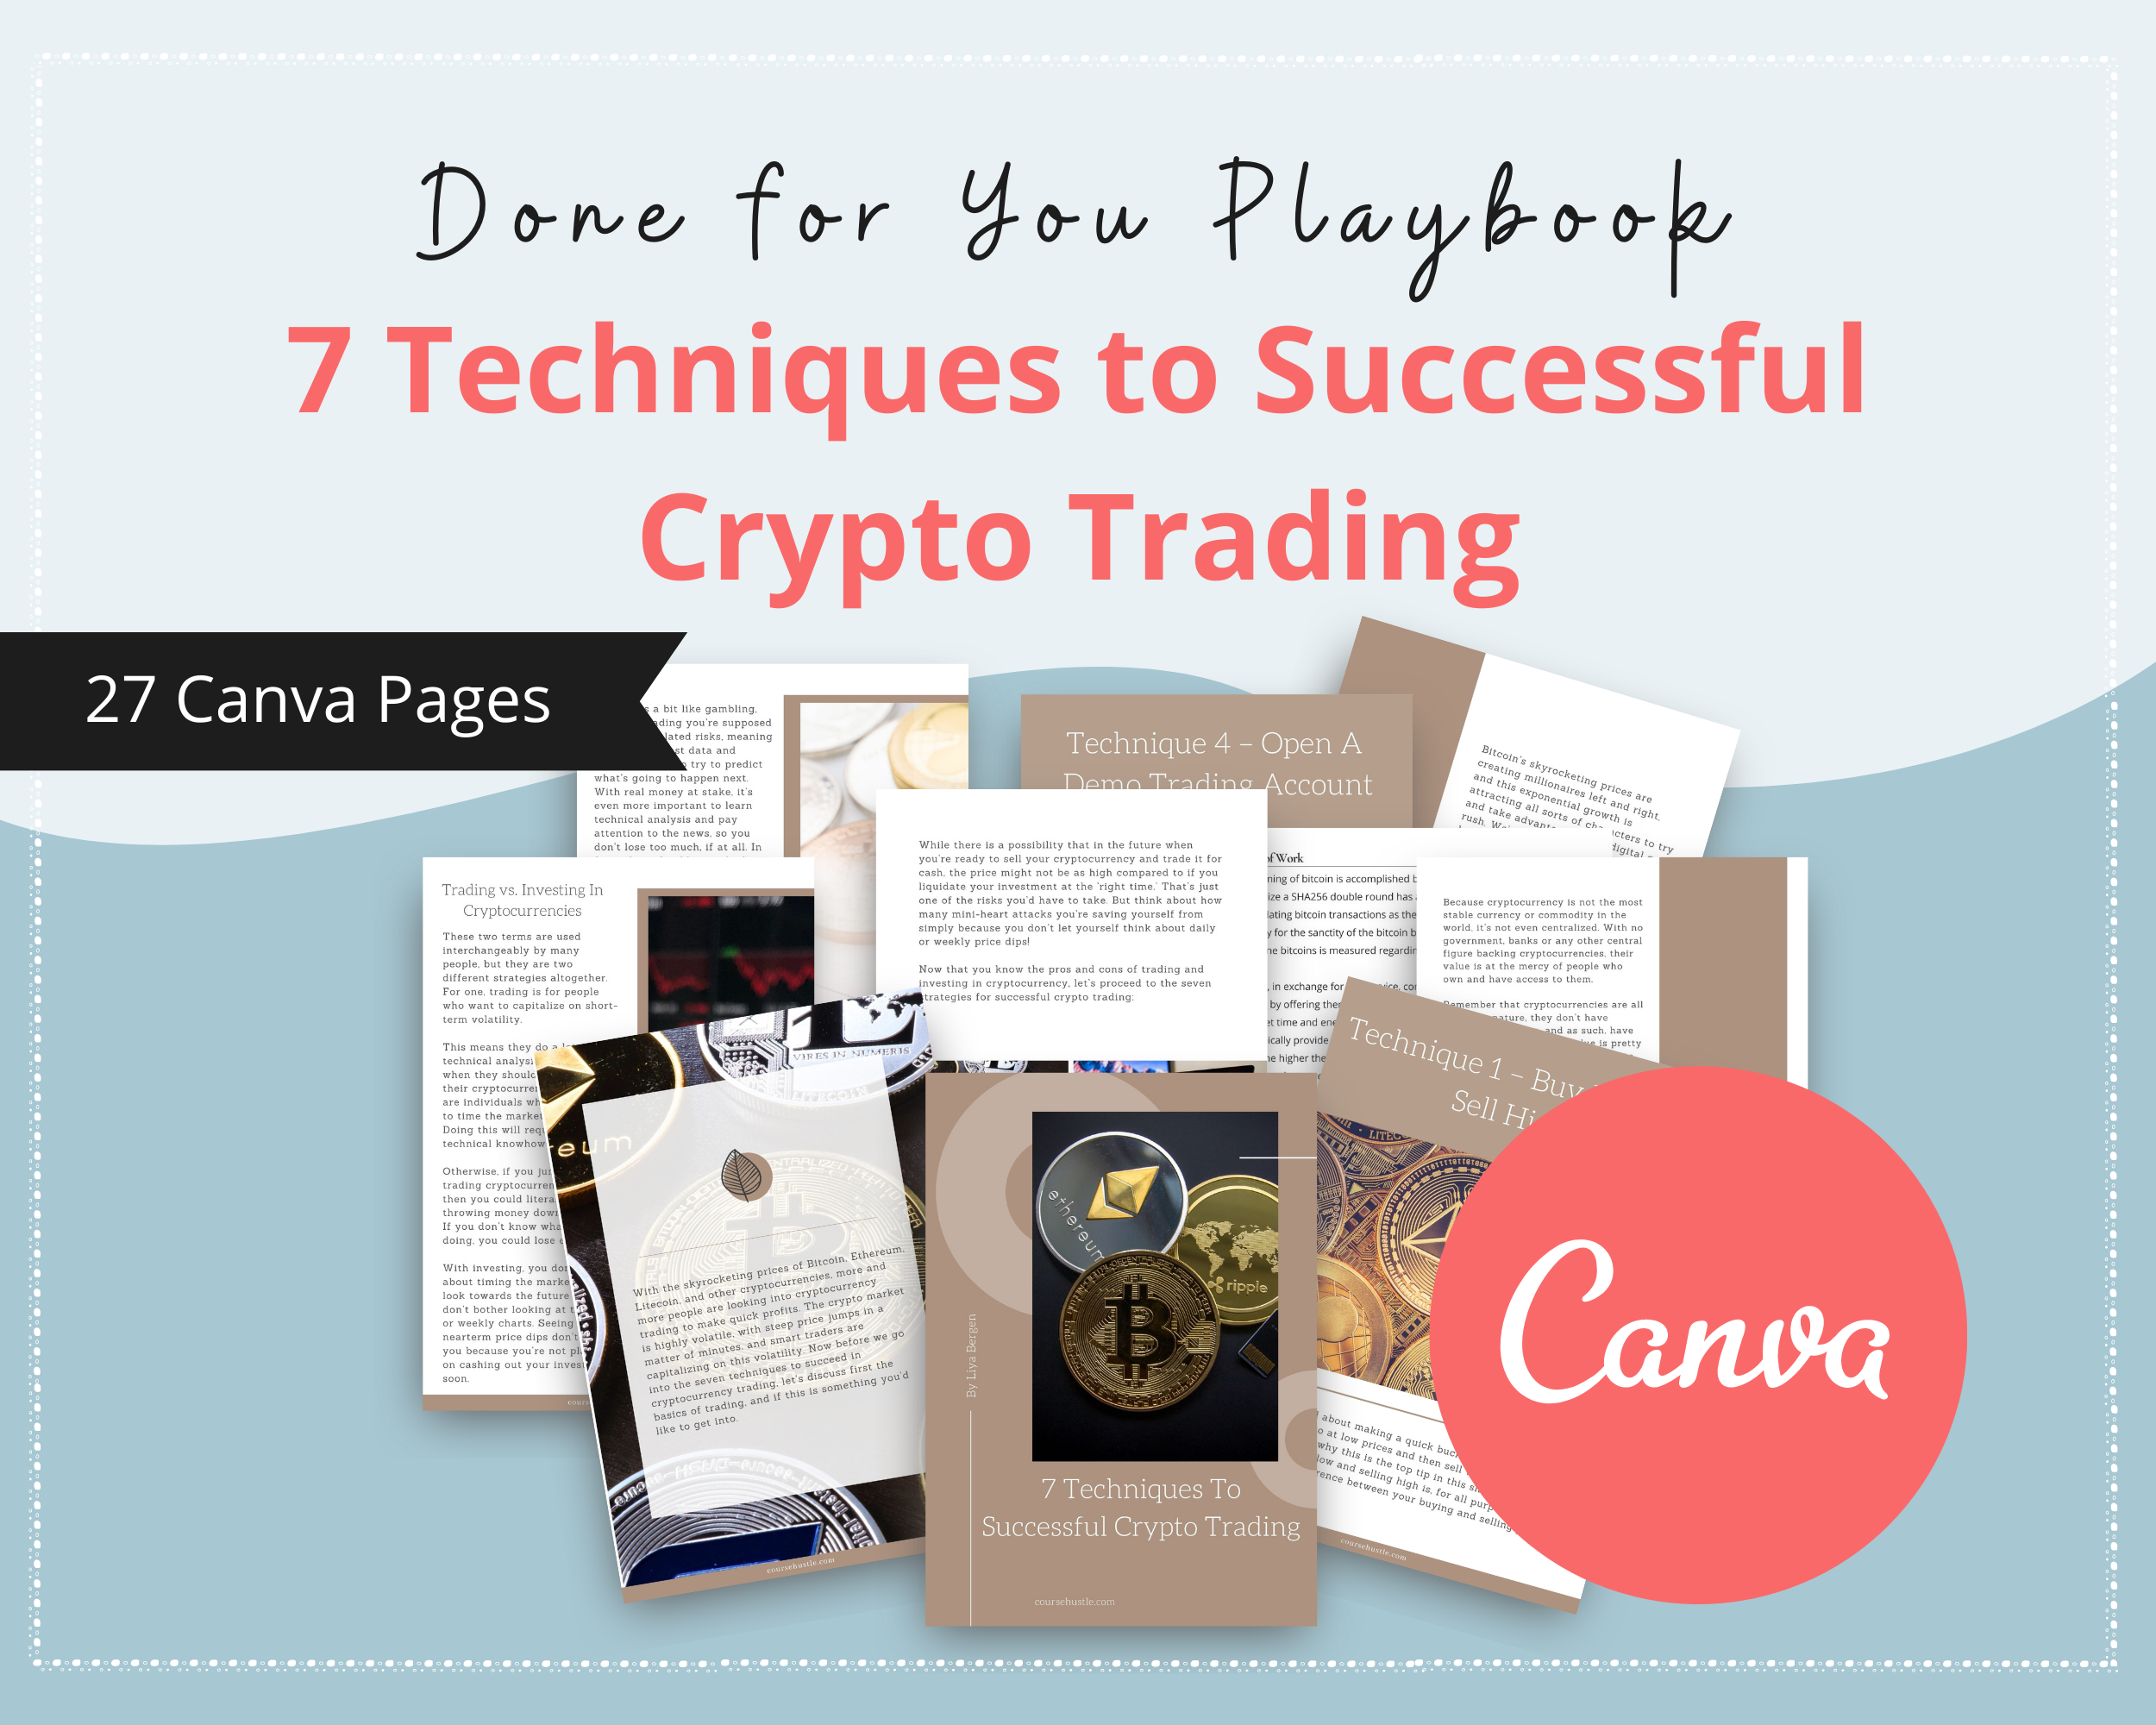 7 Techniques to Successful Crypto Trading Playbook in Canva | Done for You Editable A4 Size Canva Template